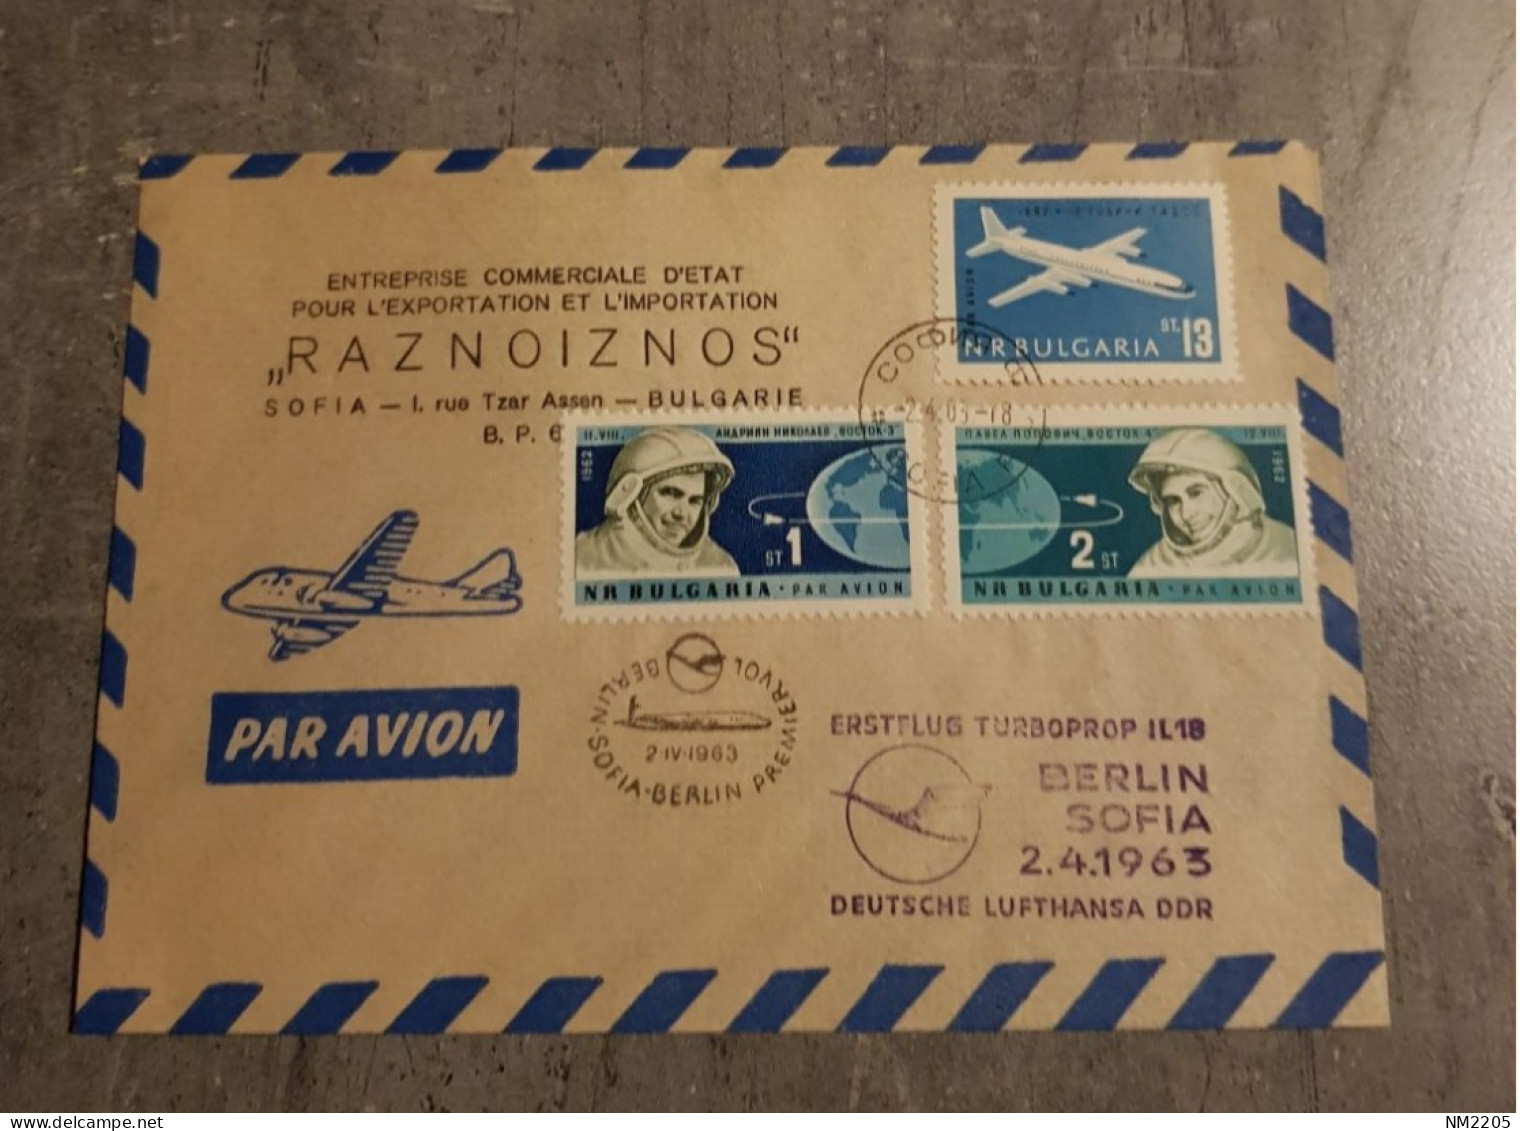 BULGARIA PAR AVION SPECIAL COVER "RAZNOIZNOS" SPACE-AVIATION CIRCULED WITH SPECIAL CANCELLED - Airmail